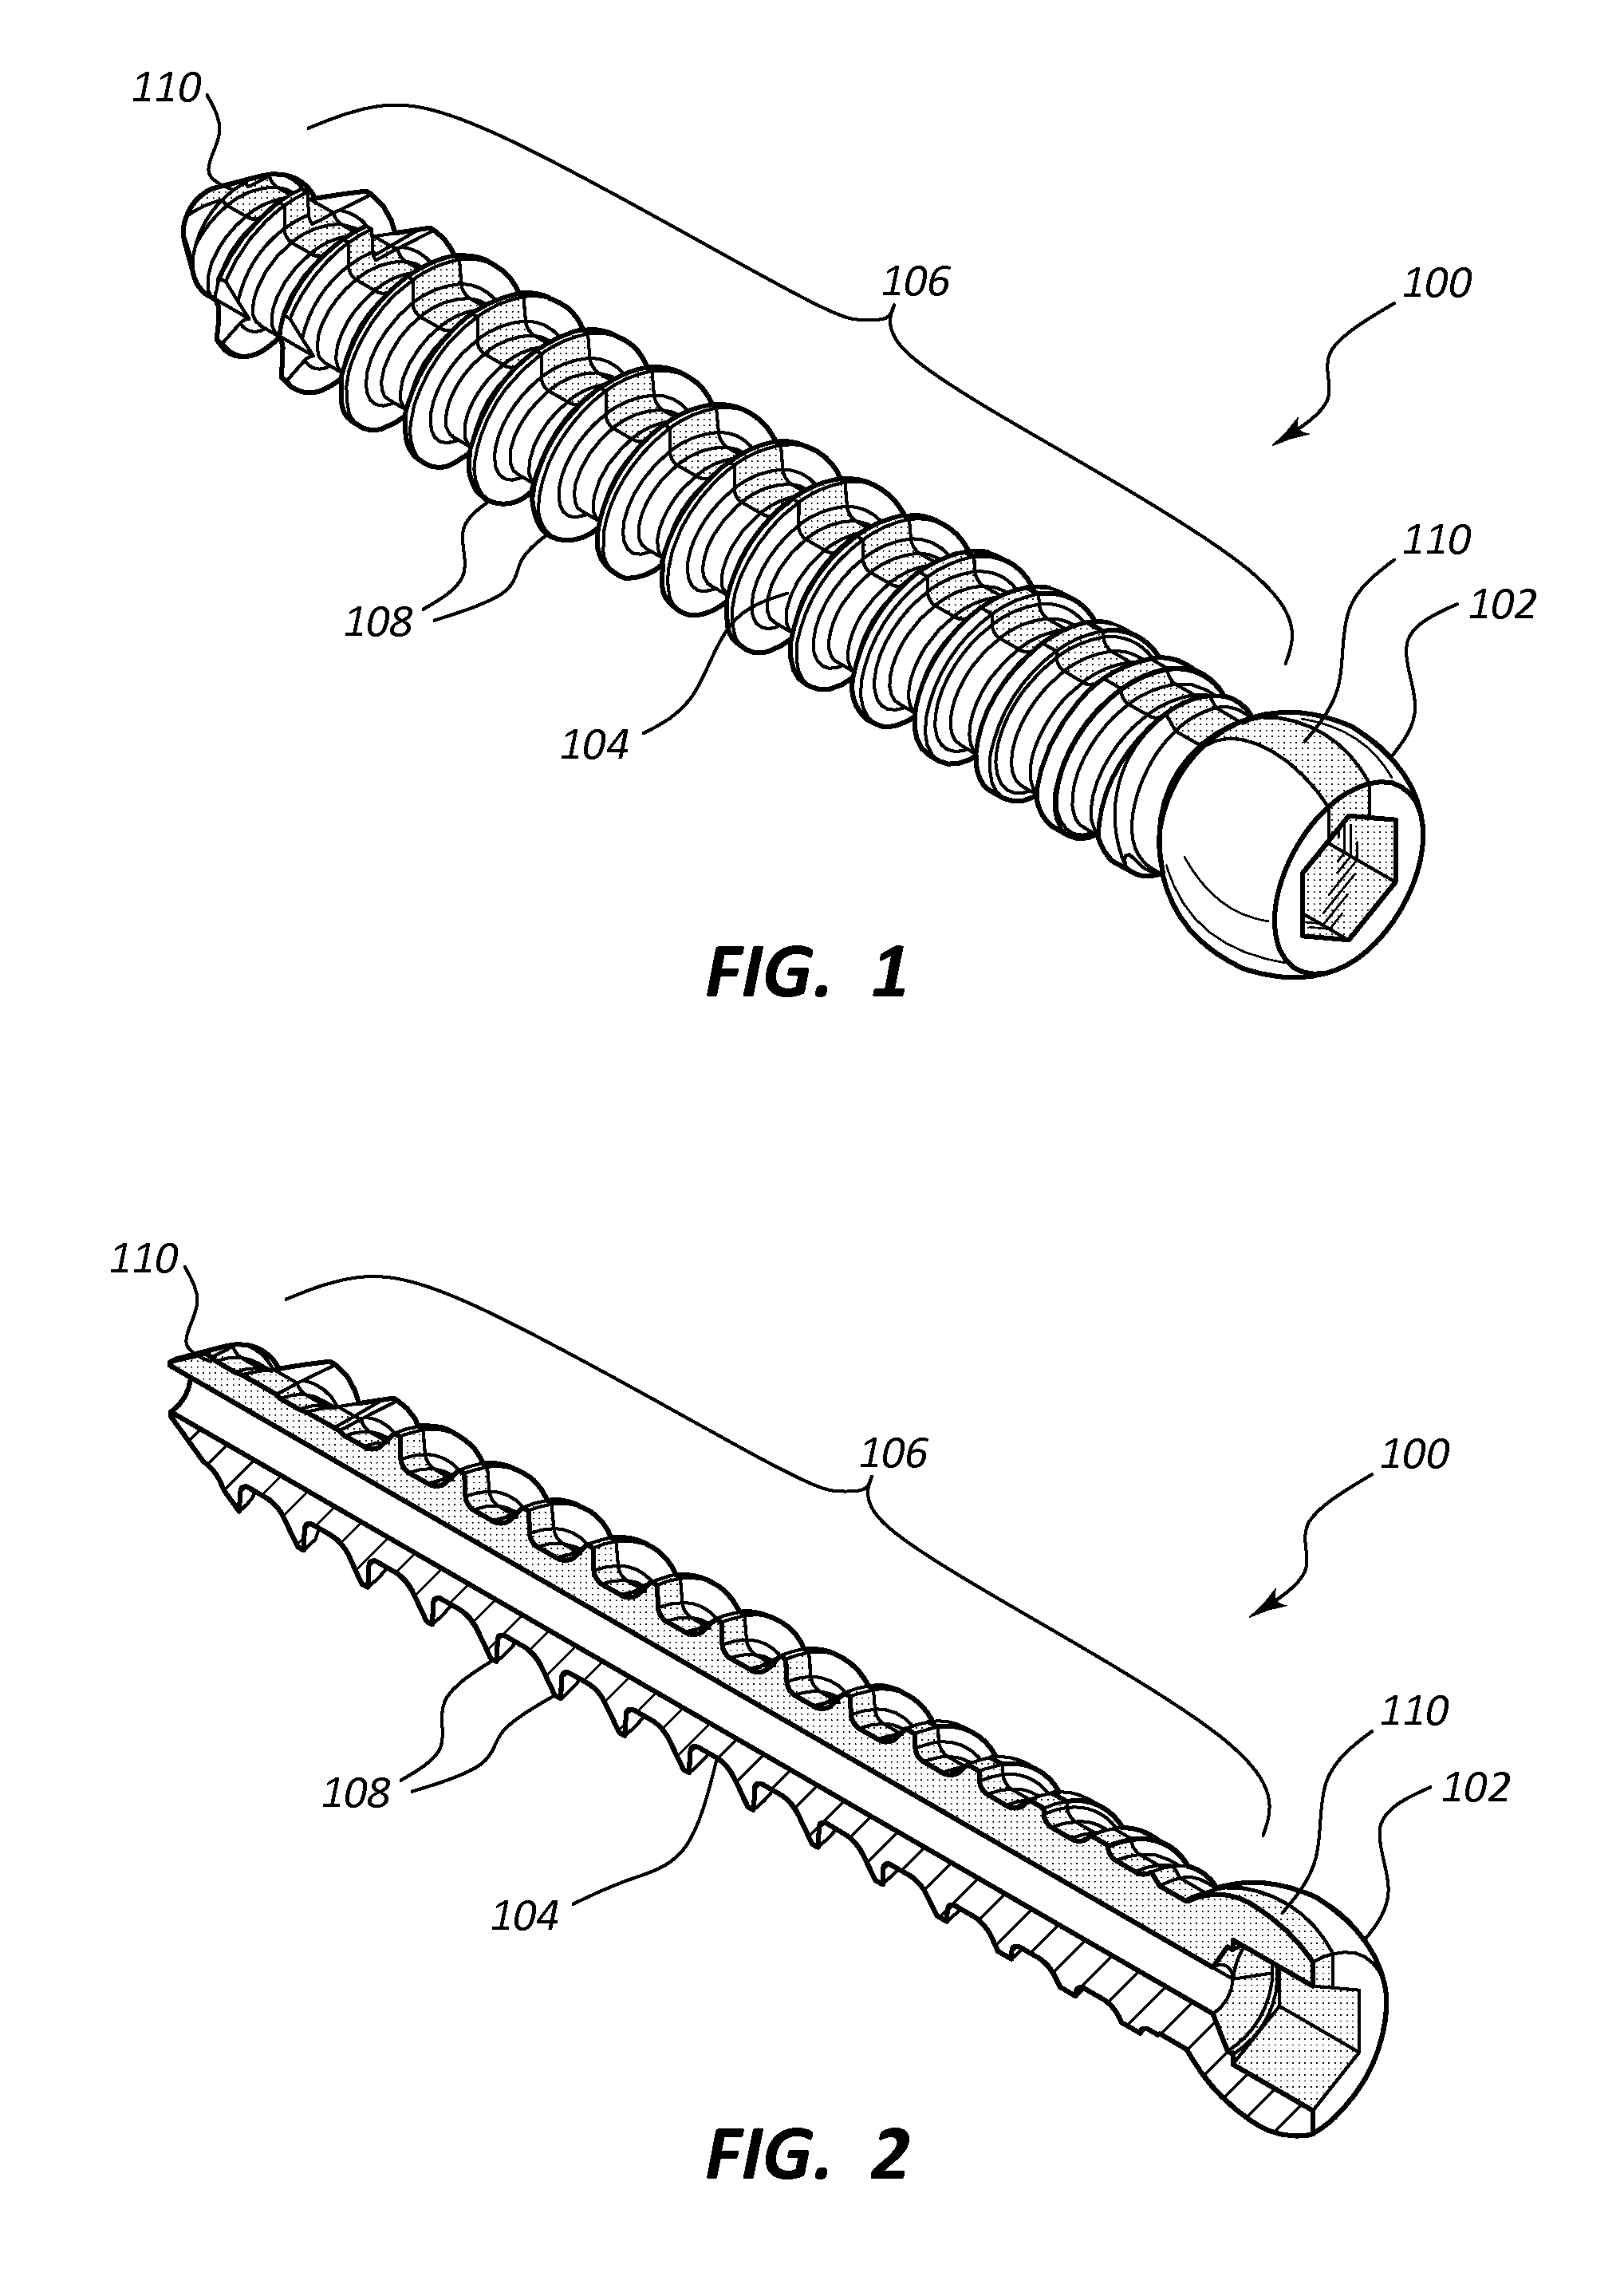 Pedicle screw with electro-conductive coating or portion